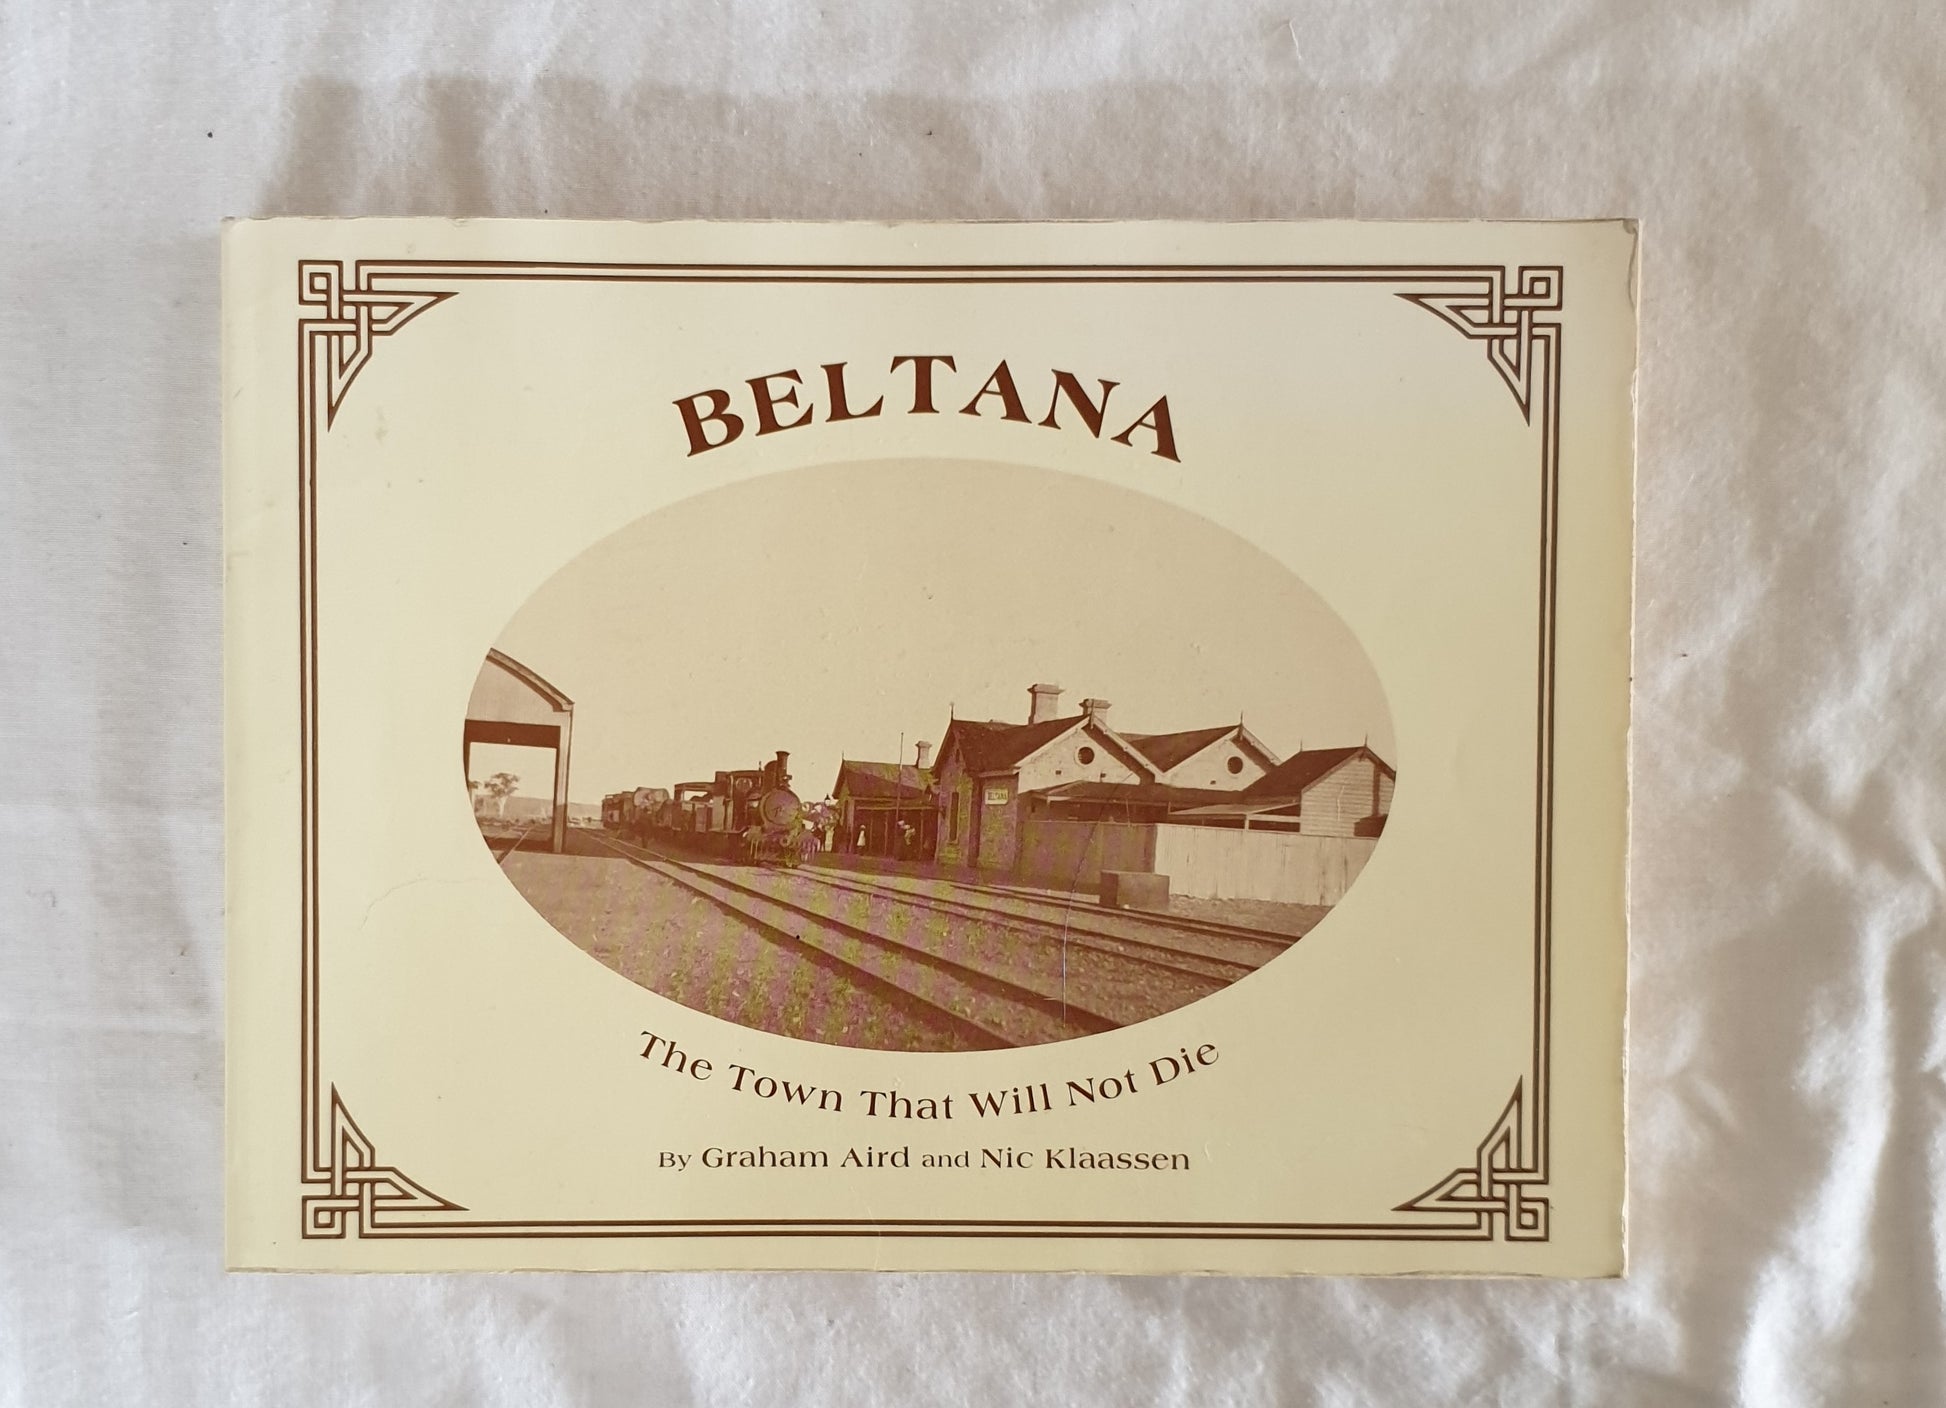 Beltana  The Town That Will Not Die  by Graham Aird and Nic Klaassen  with sketches by David Kelly